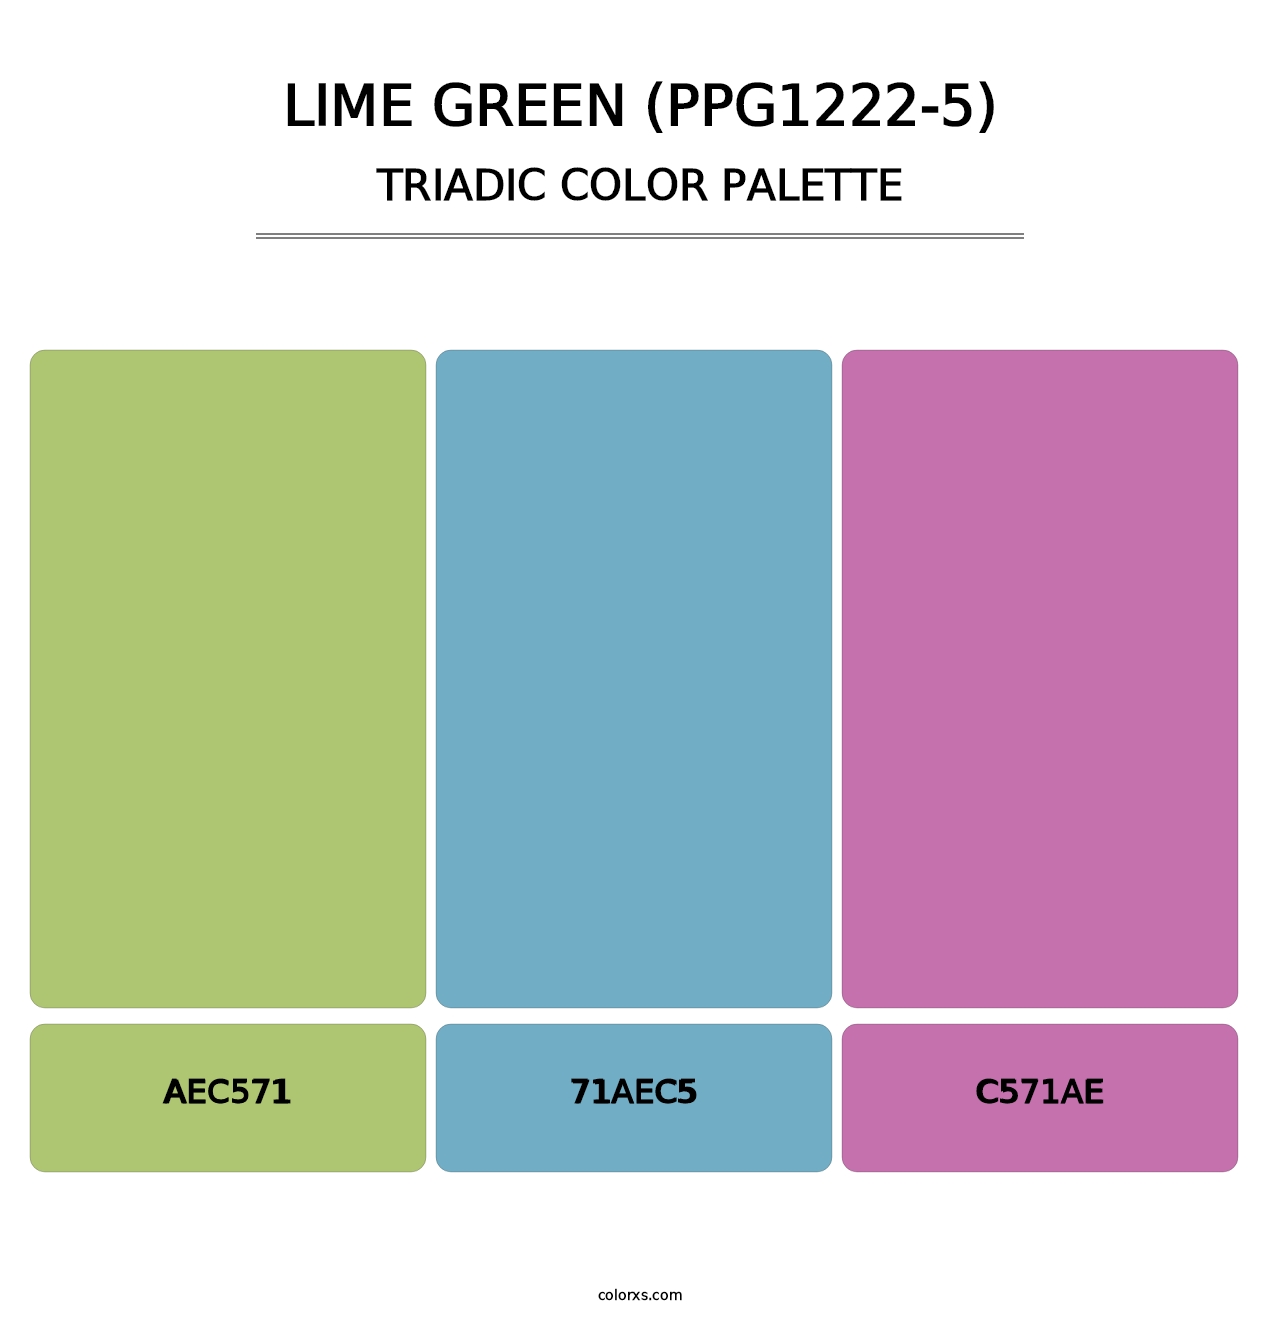 Lime Green (PPG1222-5) - Triadic Color Palette